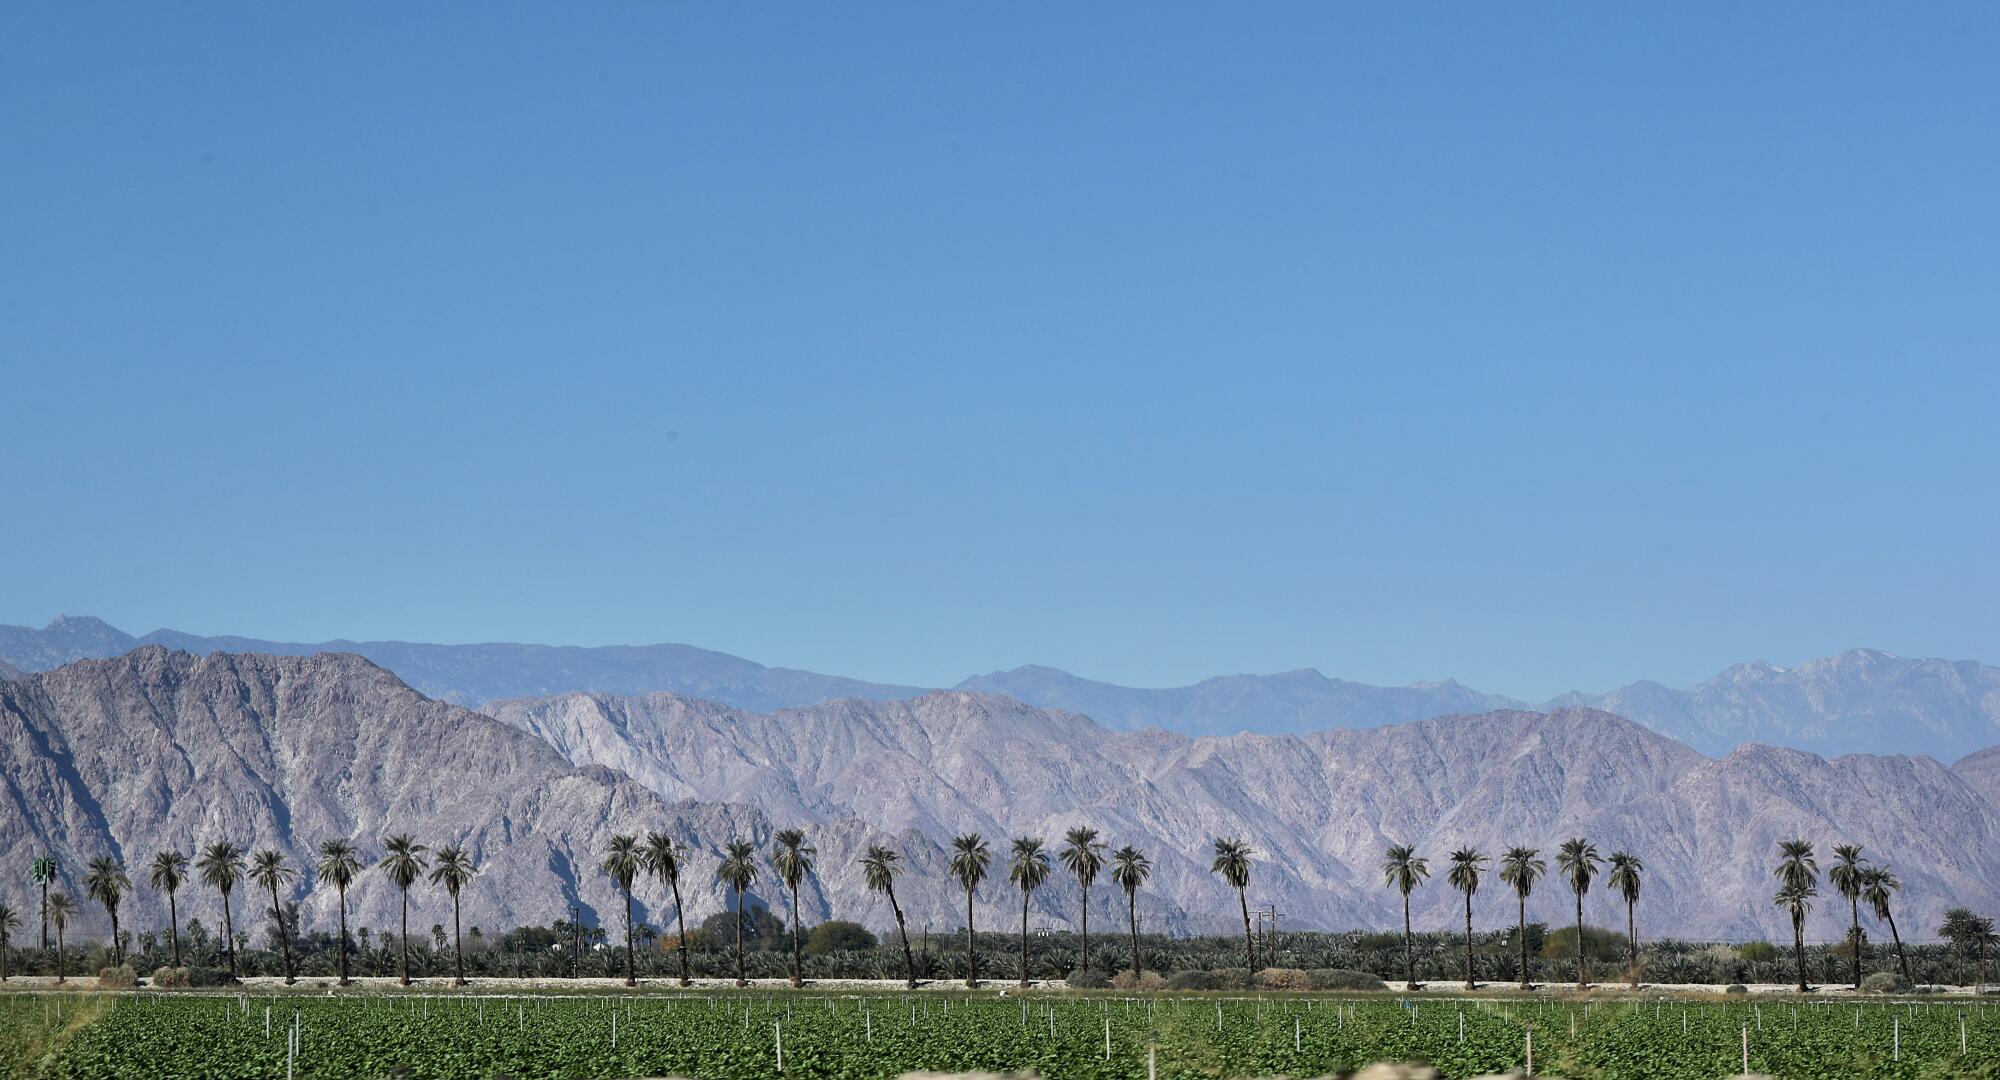 Agricultural fields, palm trees and the San Jacinto Mountains dot the landscape on the outskirts of Coachella.